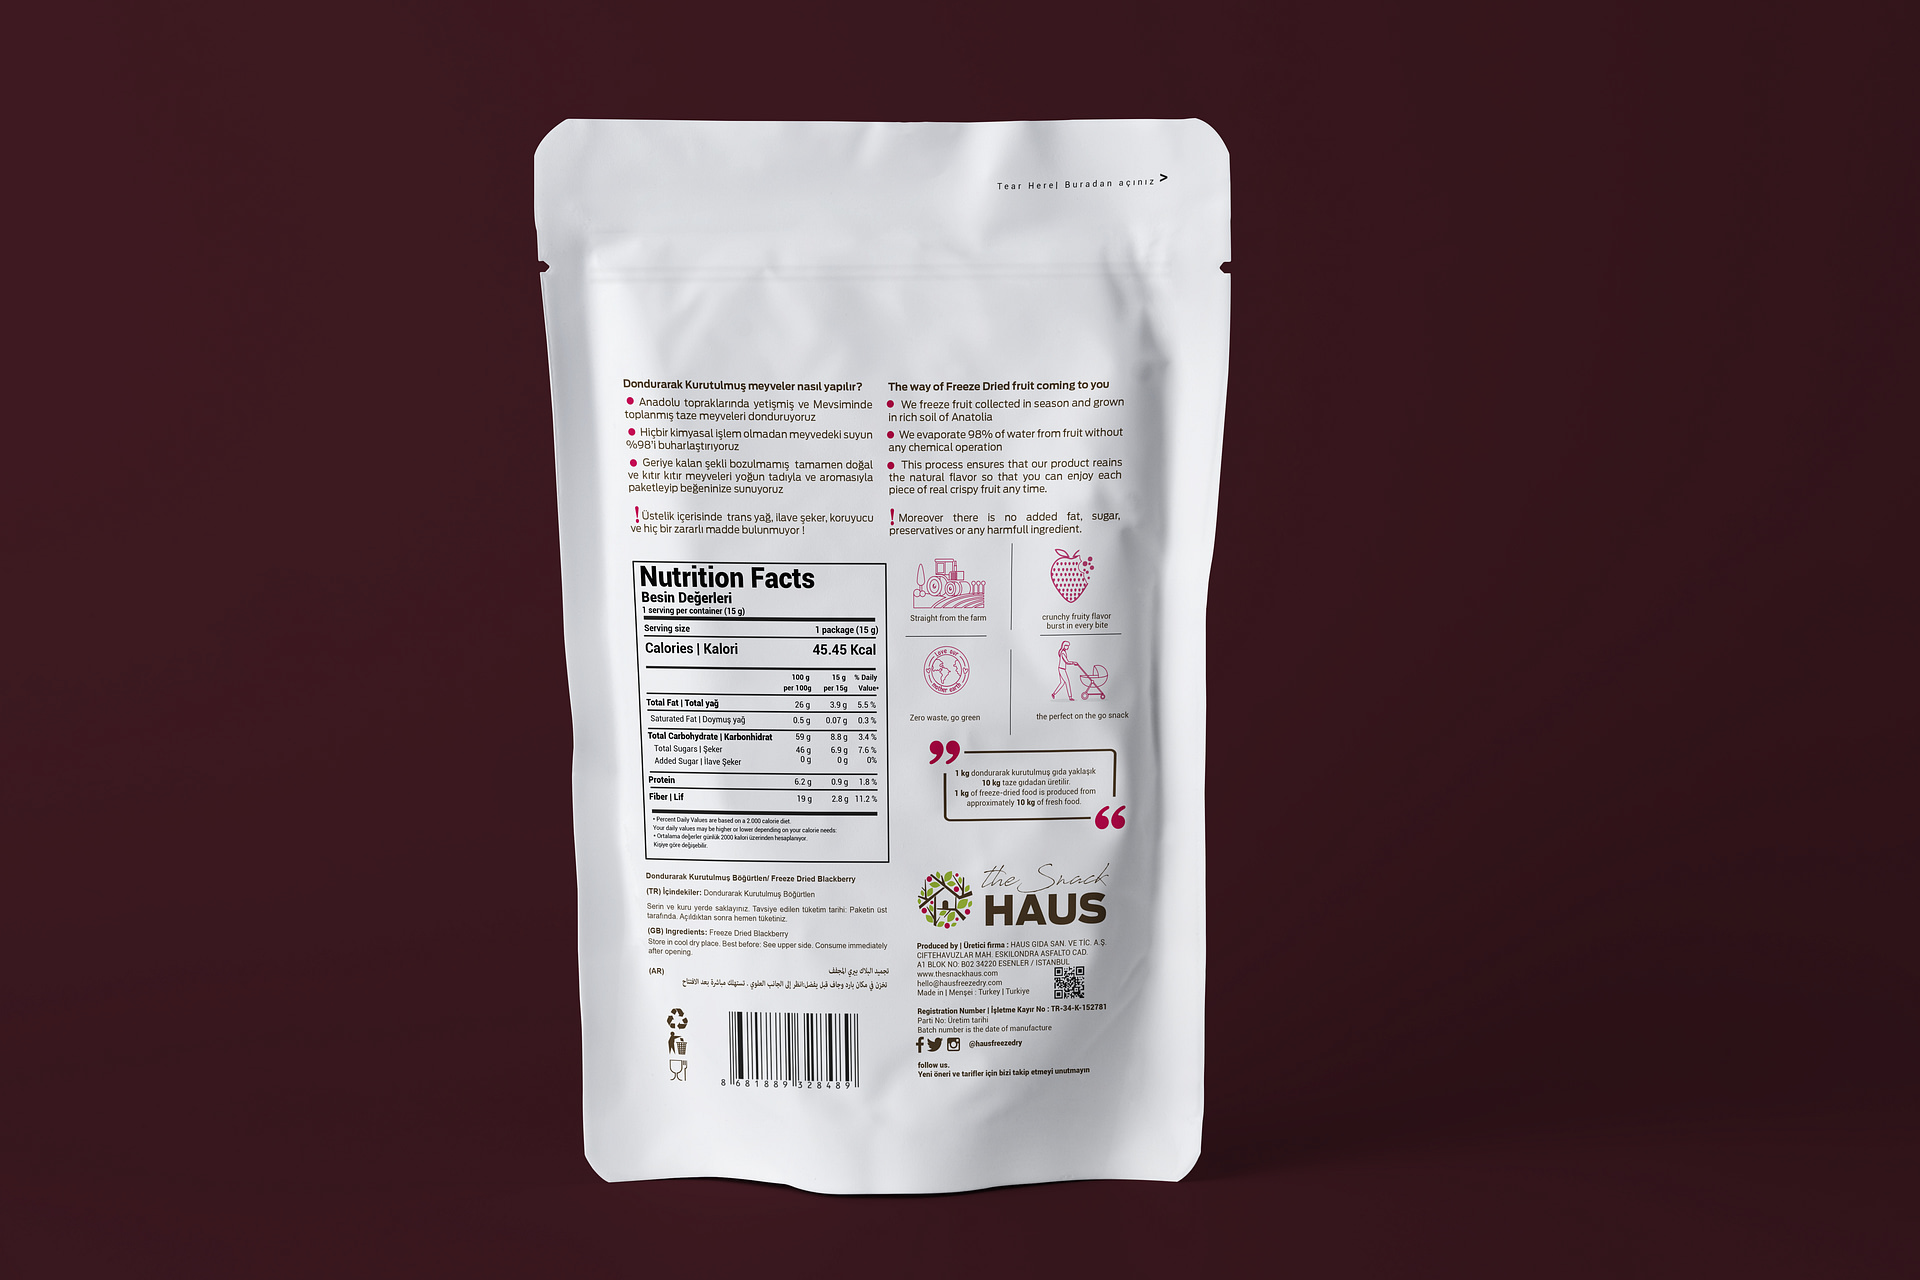 The Snack HAUS Freeze Dried Blackberry